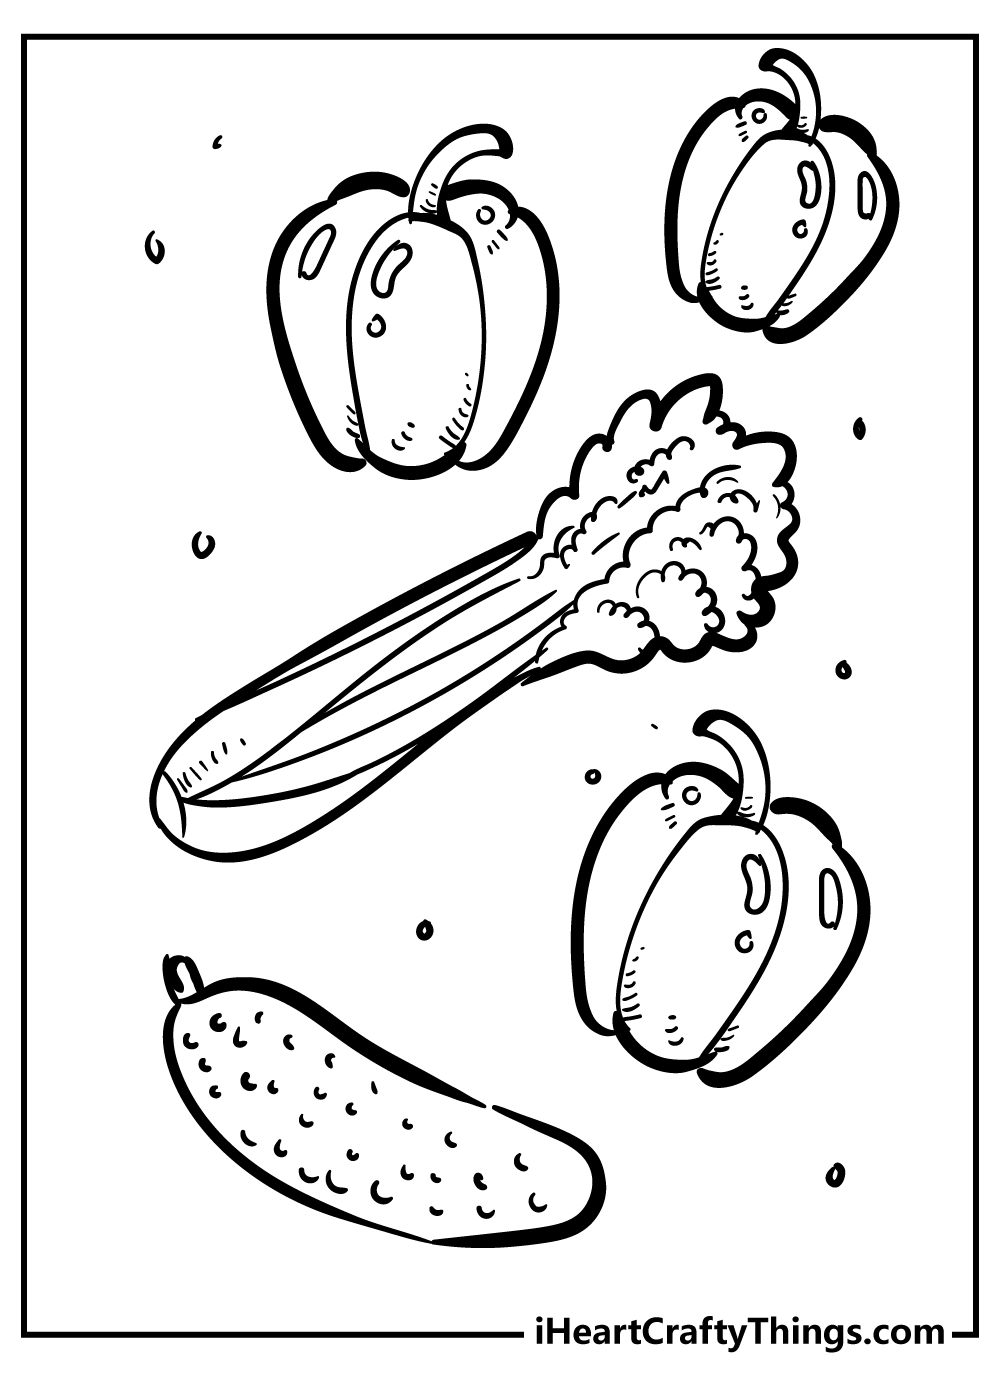 Vegetables Coloring Pages for adults free printable